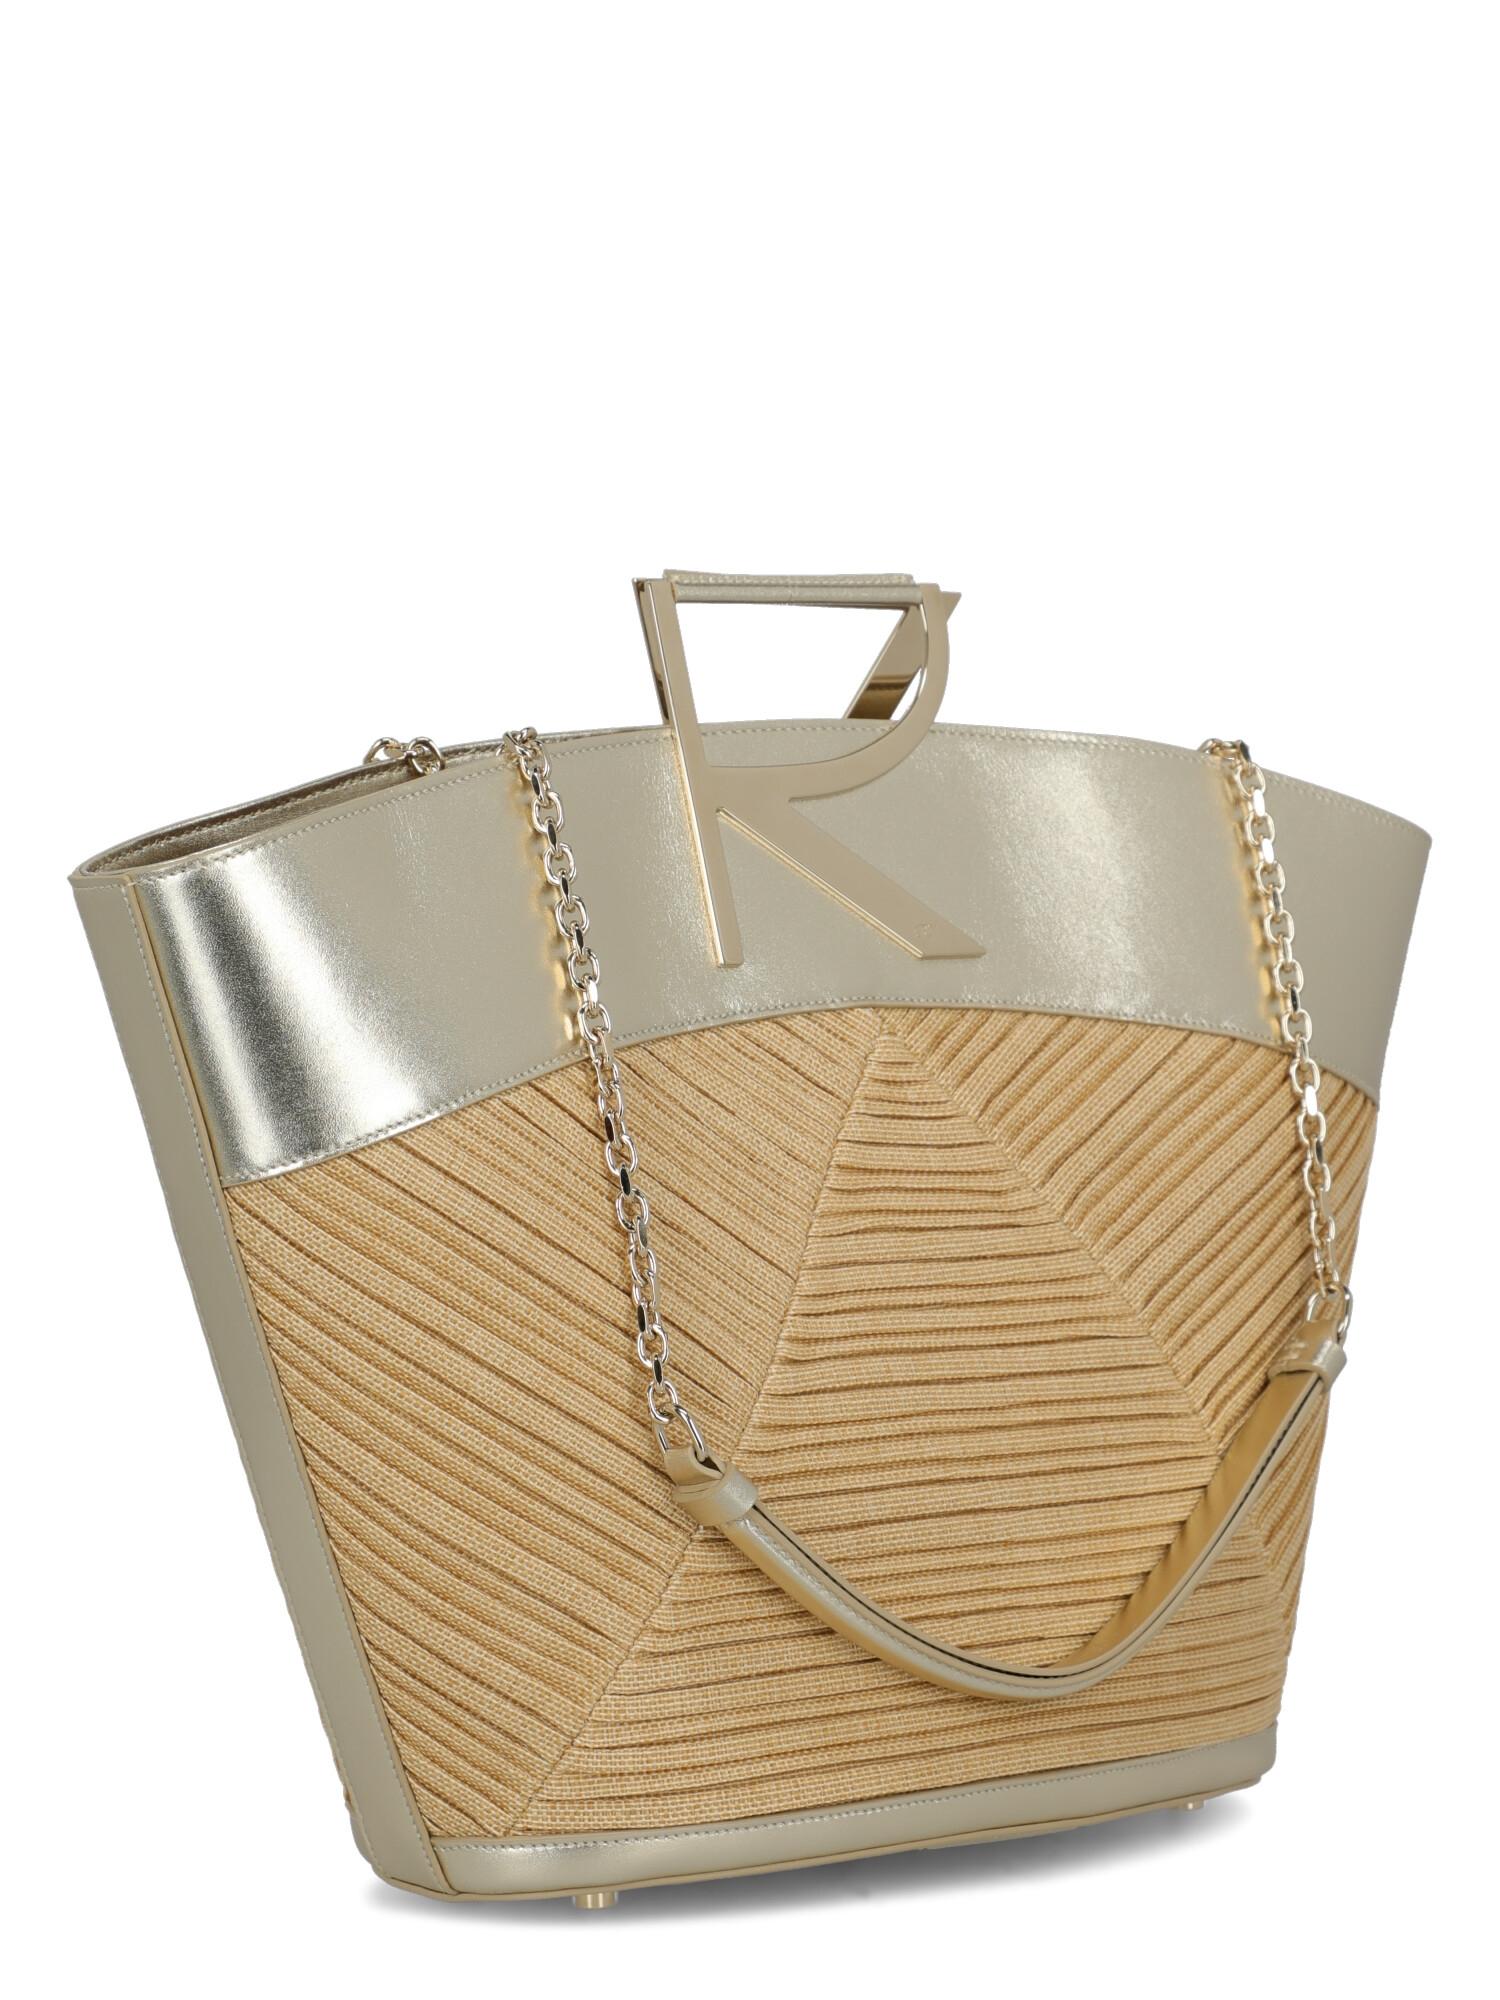 Roger Vivier Women's Handbags Beige/Gold Leather In Excellent Condition For Sale In Milan, IT